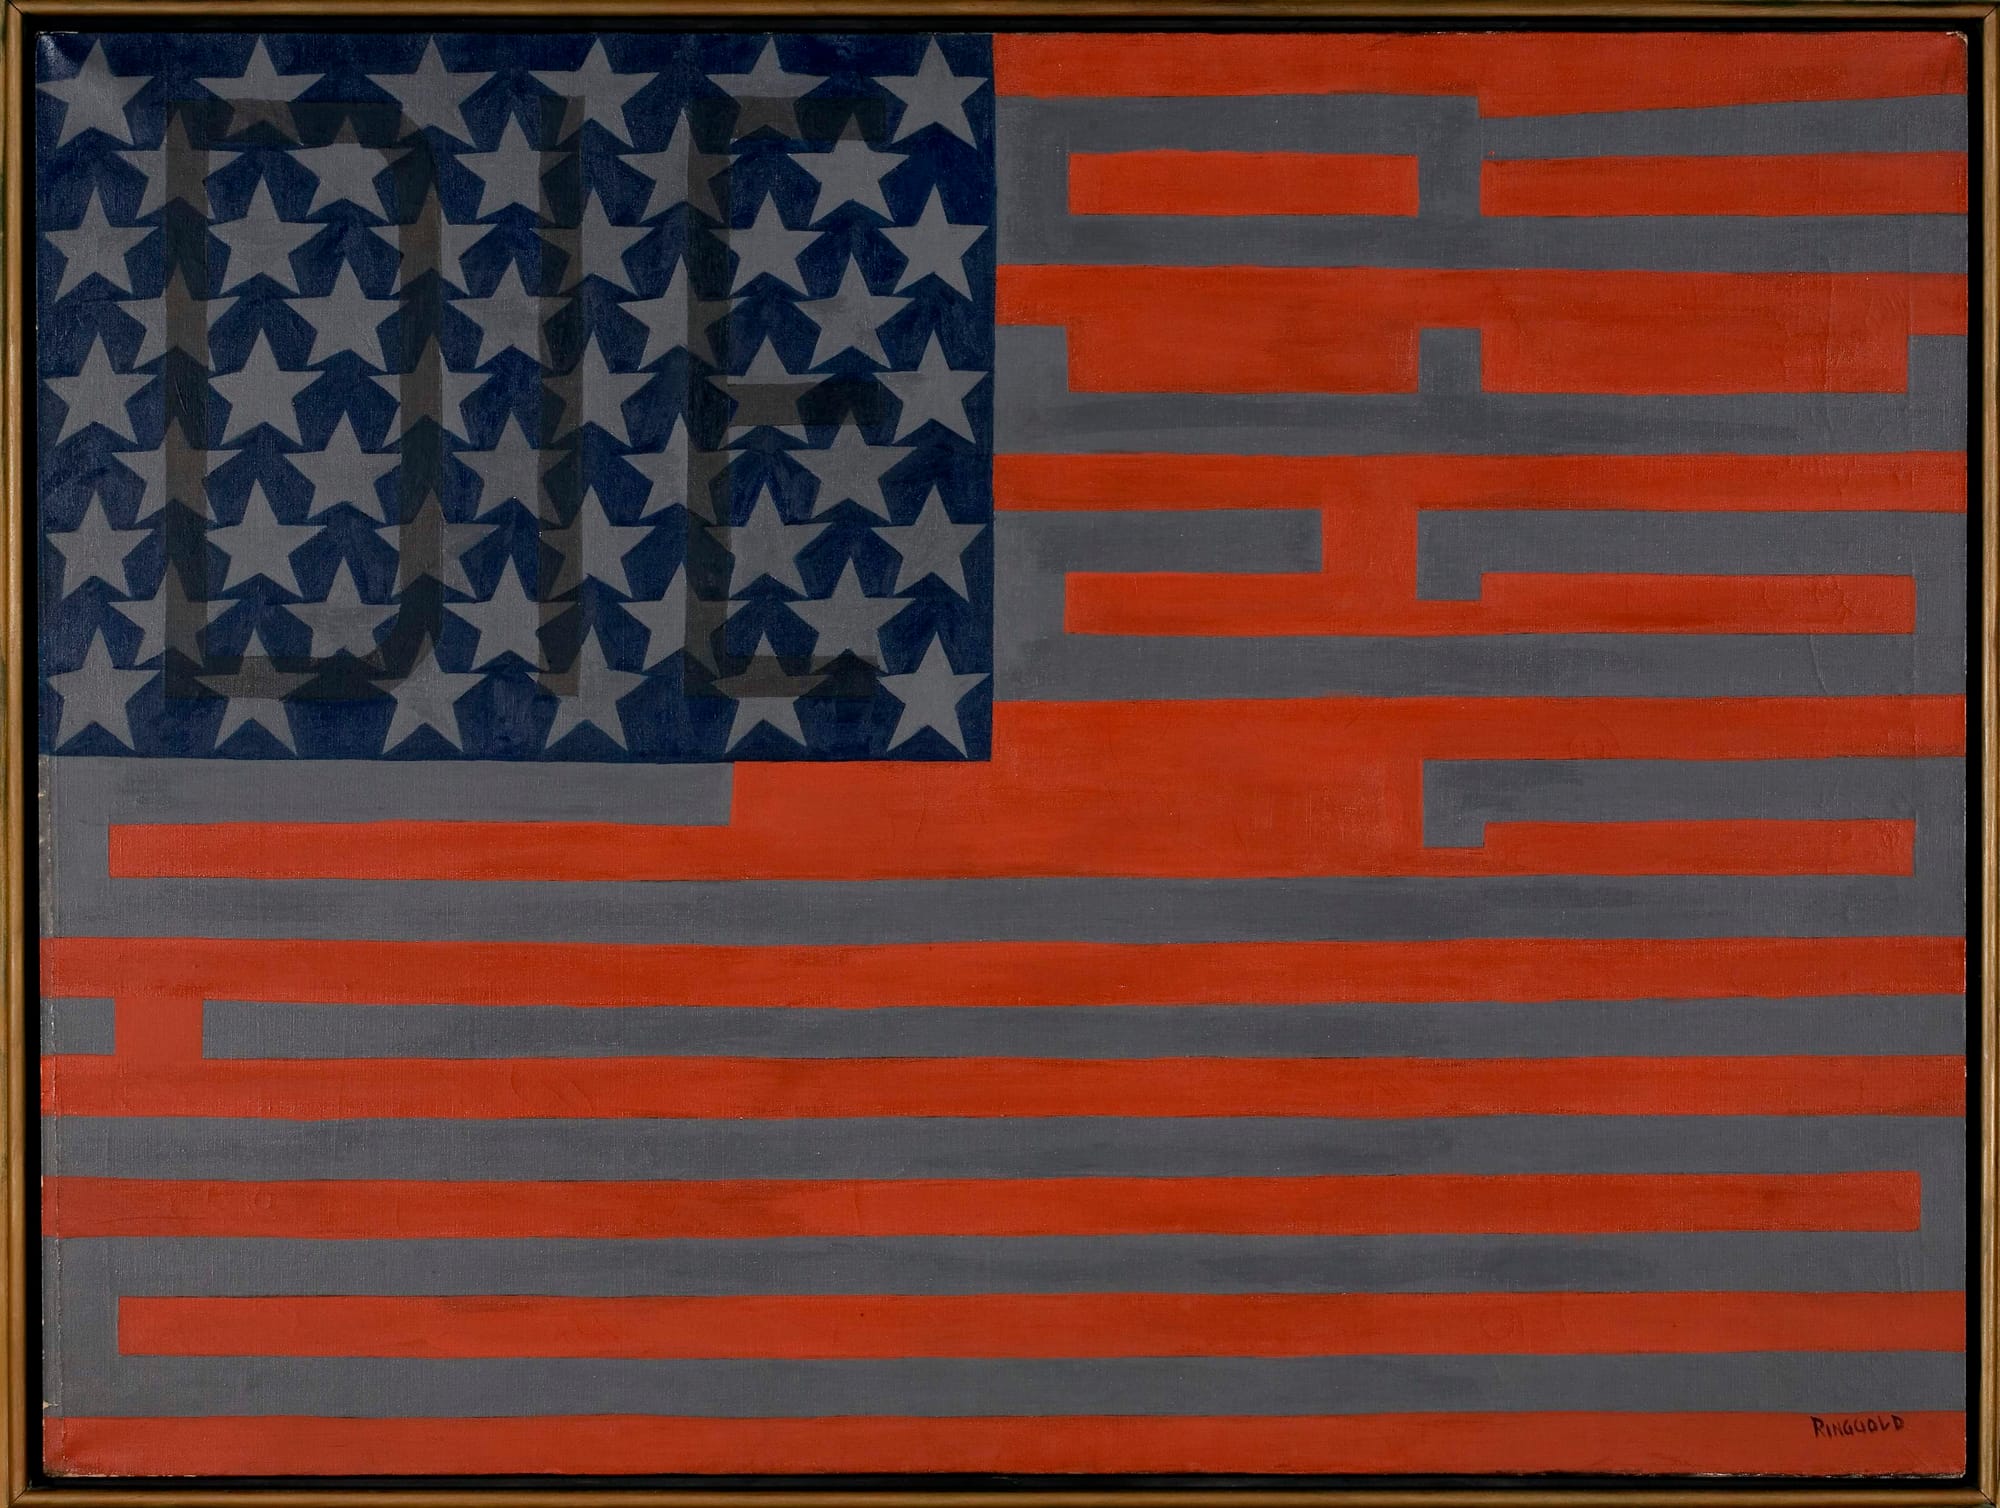 An image of a painting of the US flag with muted red, blue, and gray colors